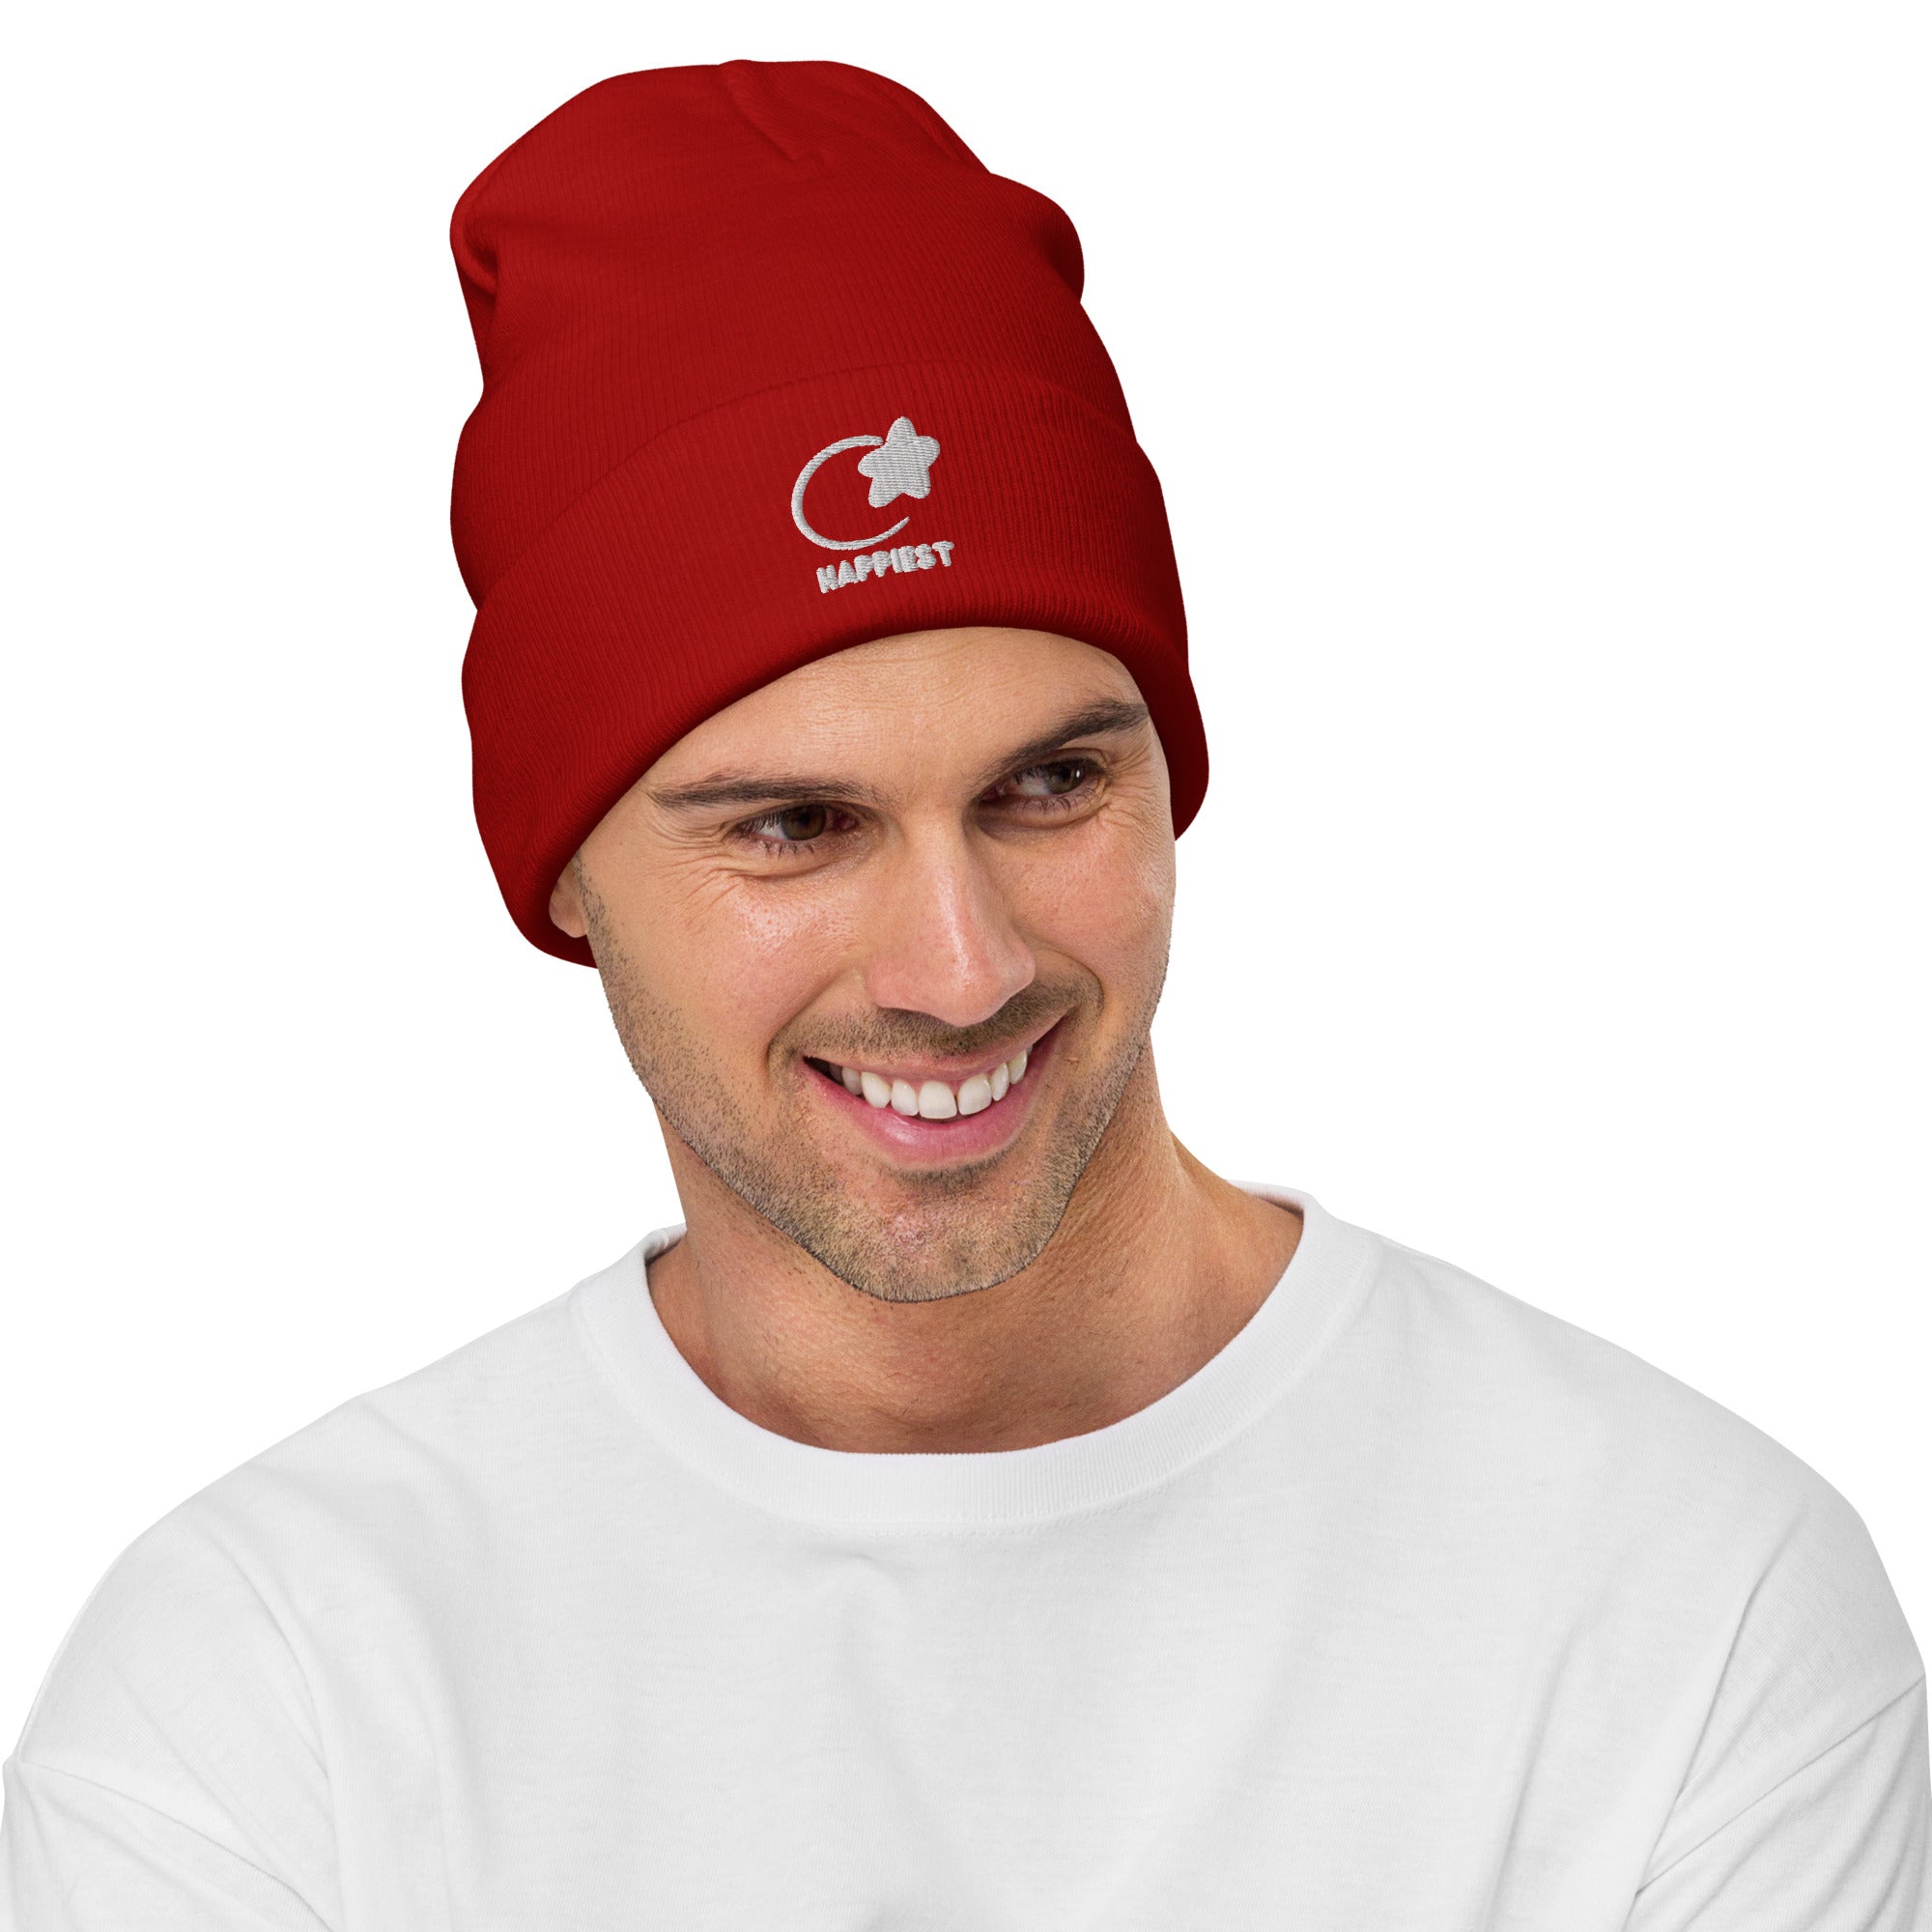 Happiest Embroidered Beanie